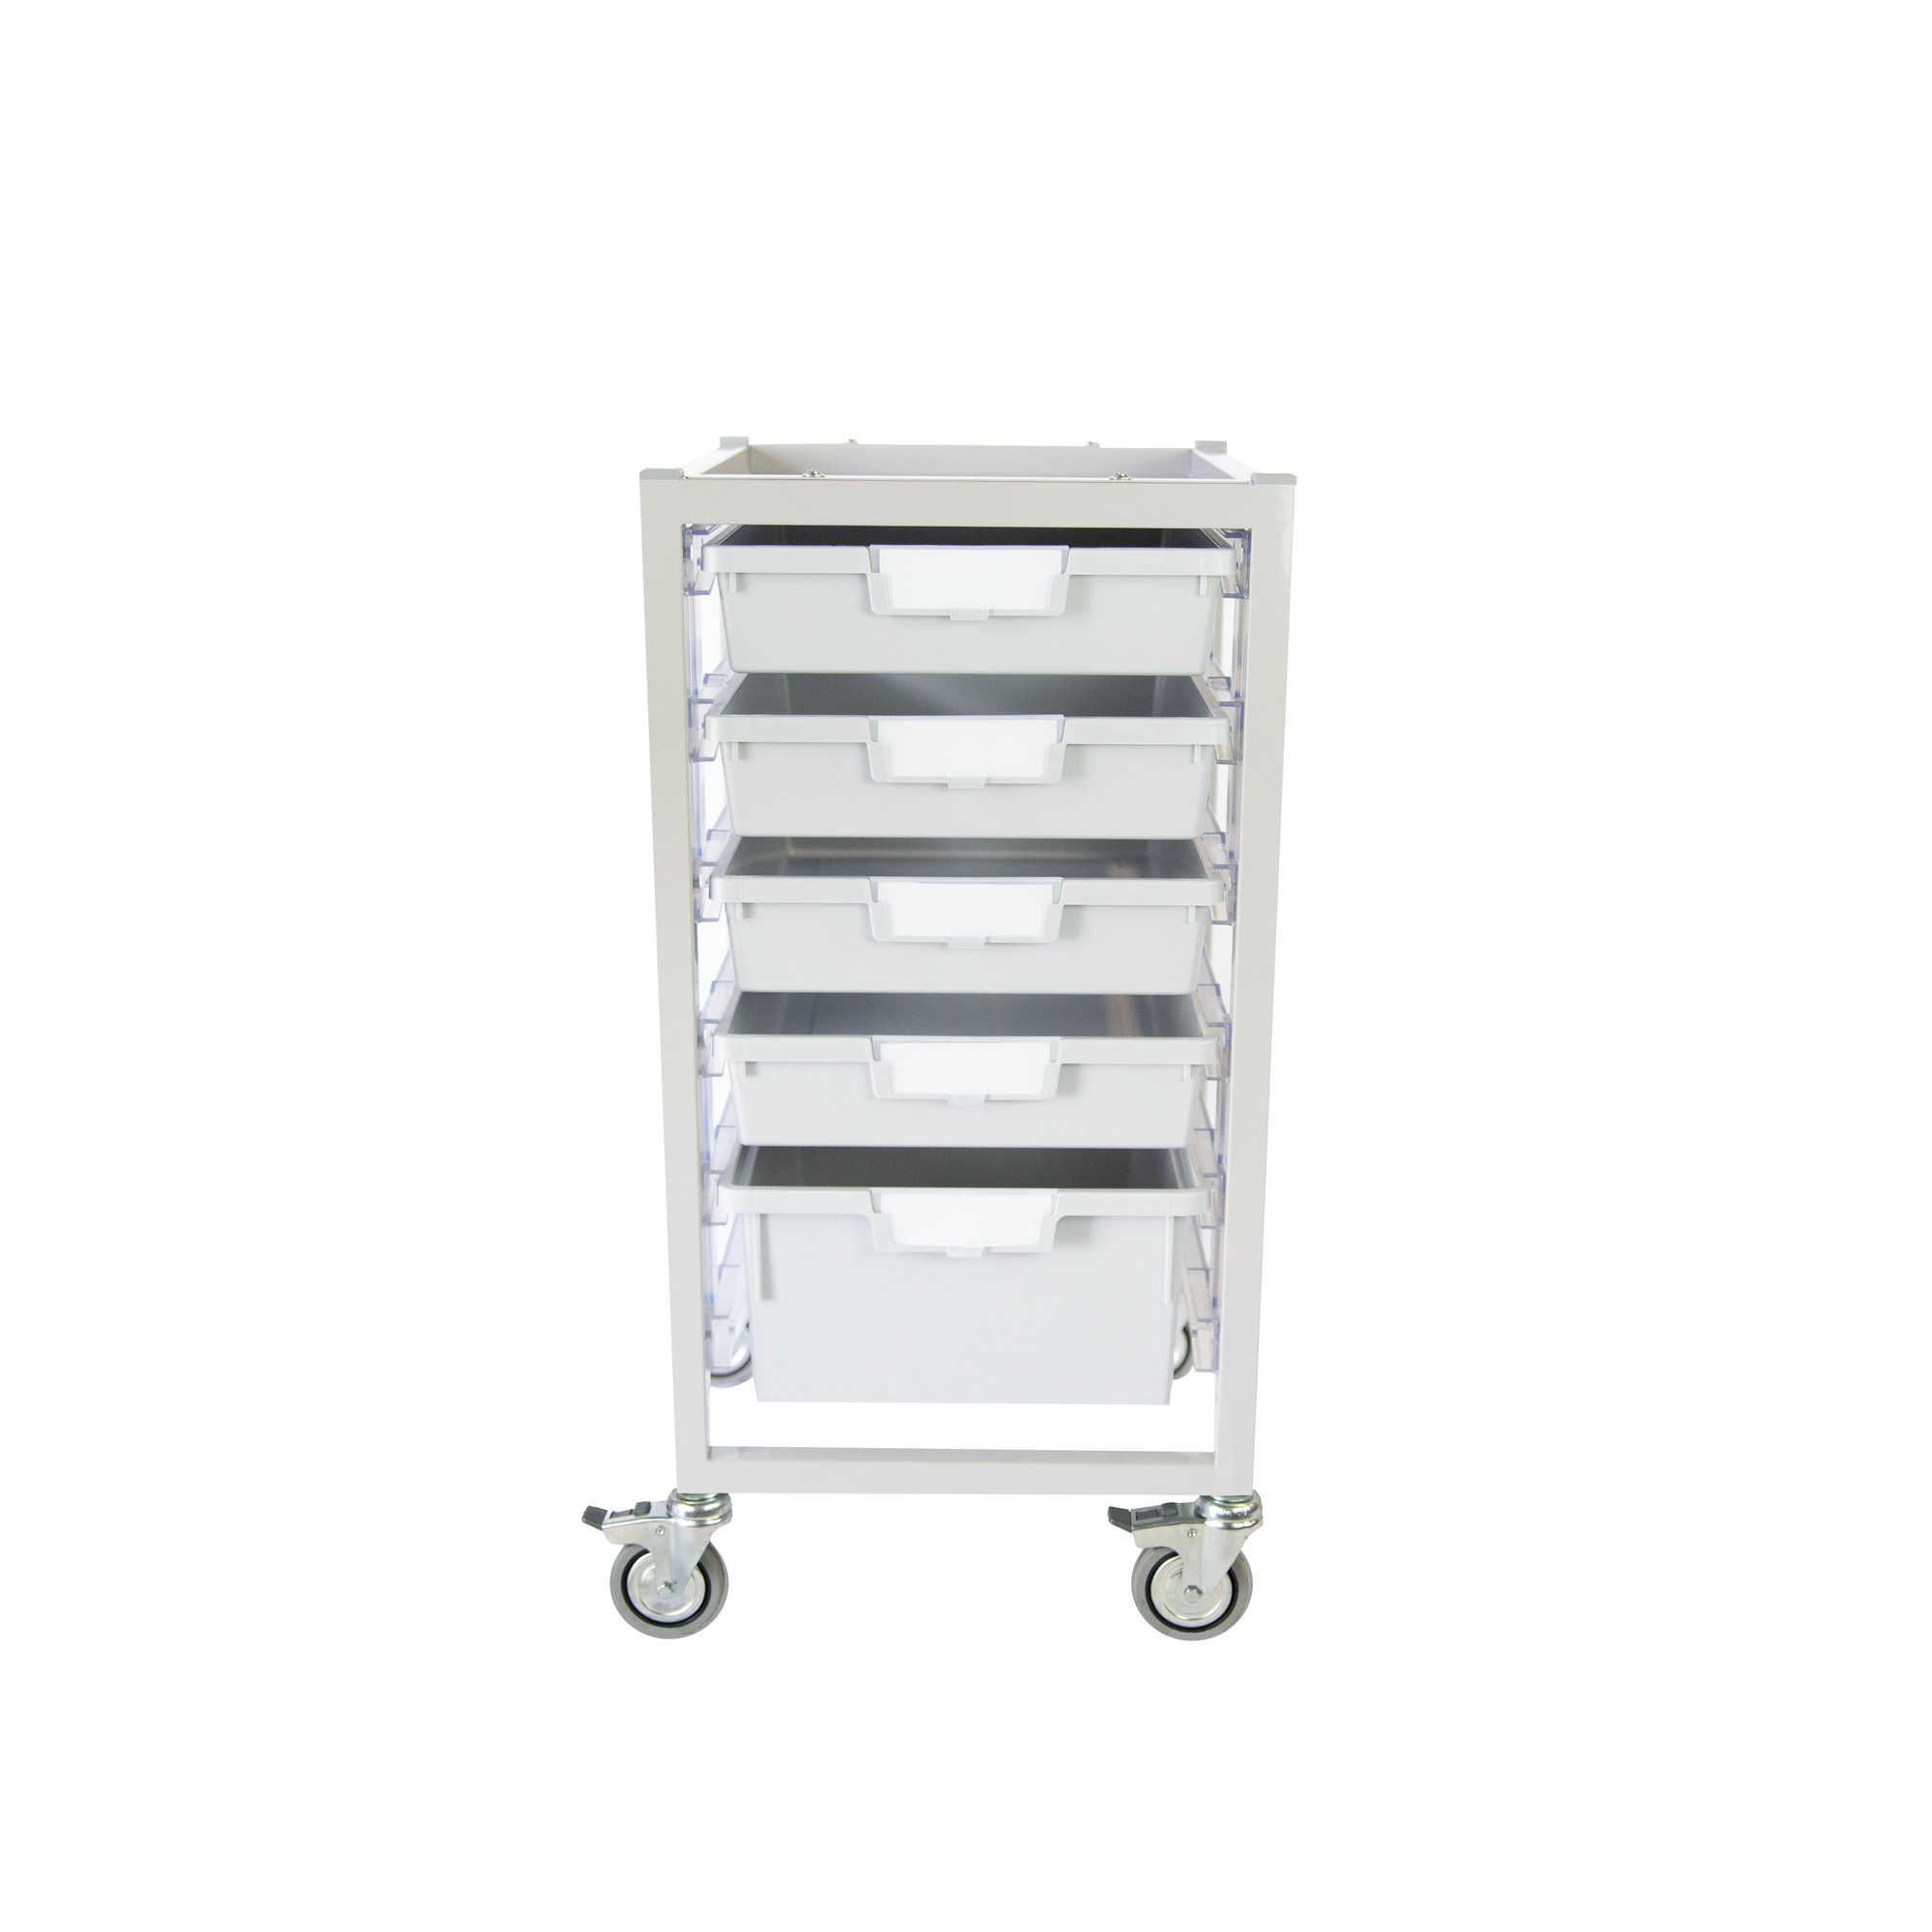 Certwood, Nimble Cart Slim-Gray with 5 Red Trays, Included (qty.) 1, Material Steel, Height 15.75 in, Model CE2100LG-4S1DPR